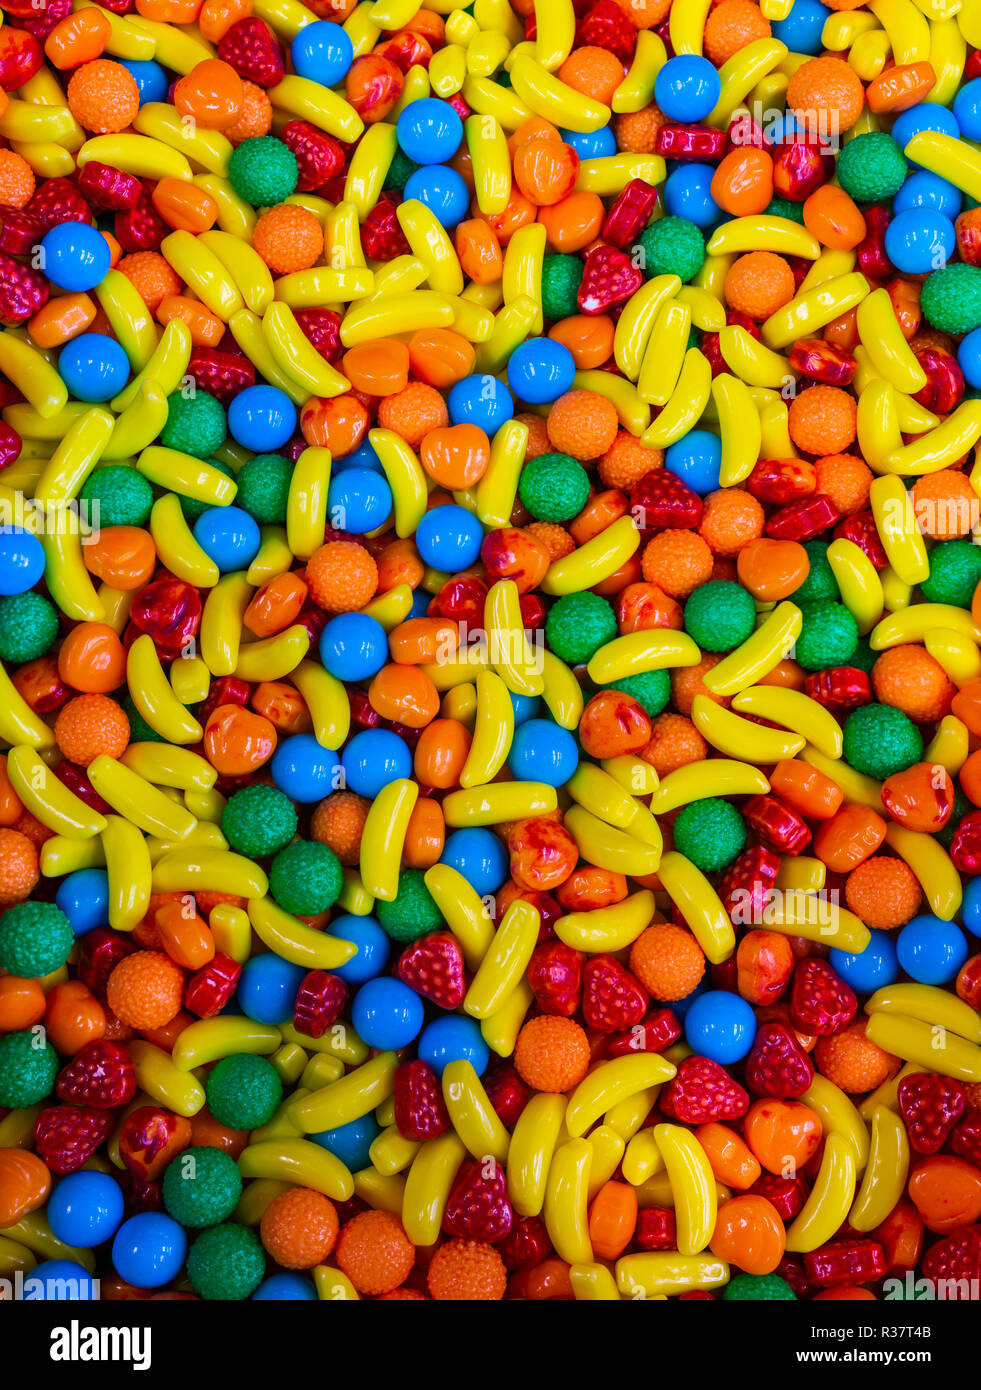 Colourful sweets, fruit blasts, Canada Stock Photo